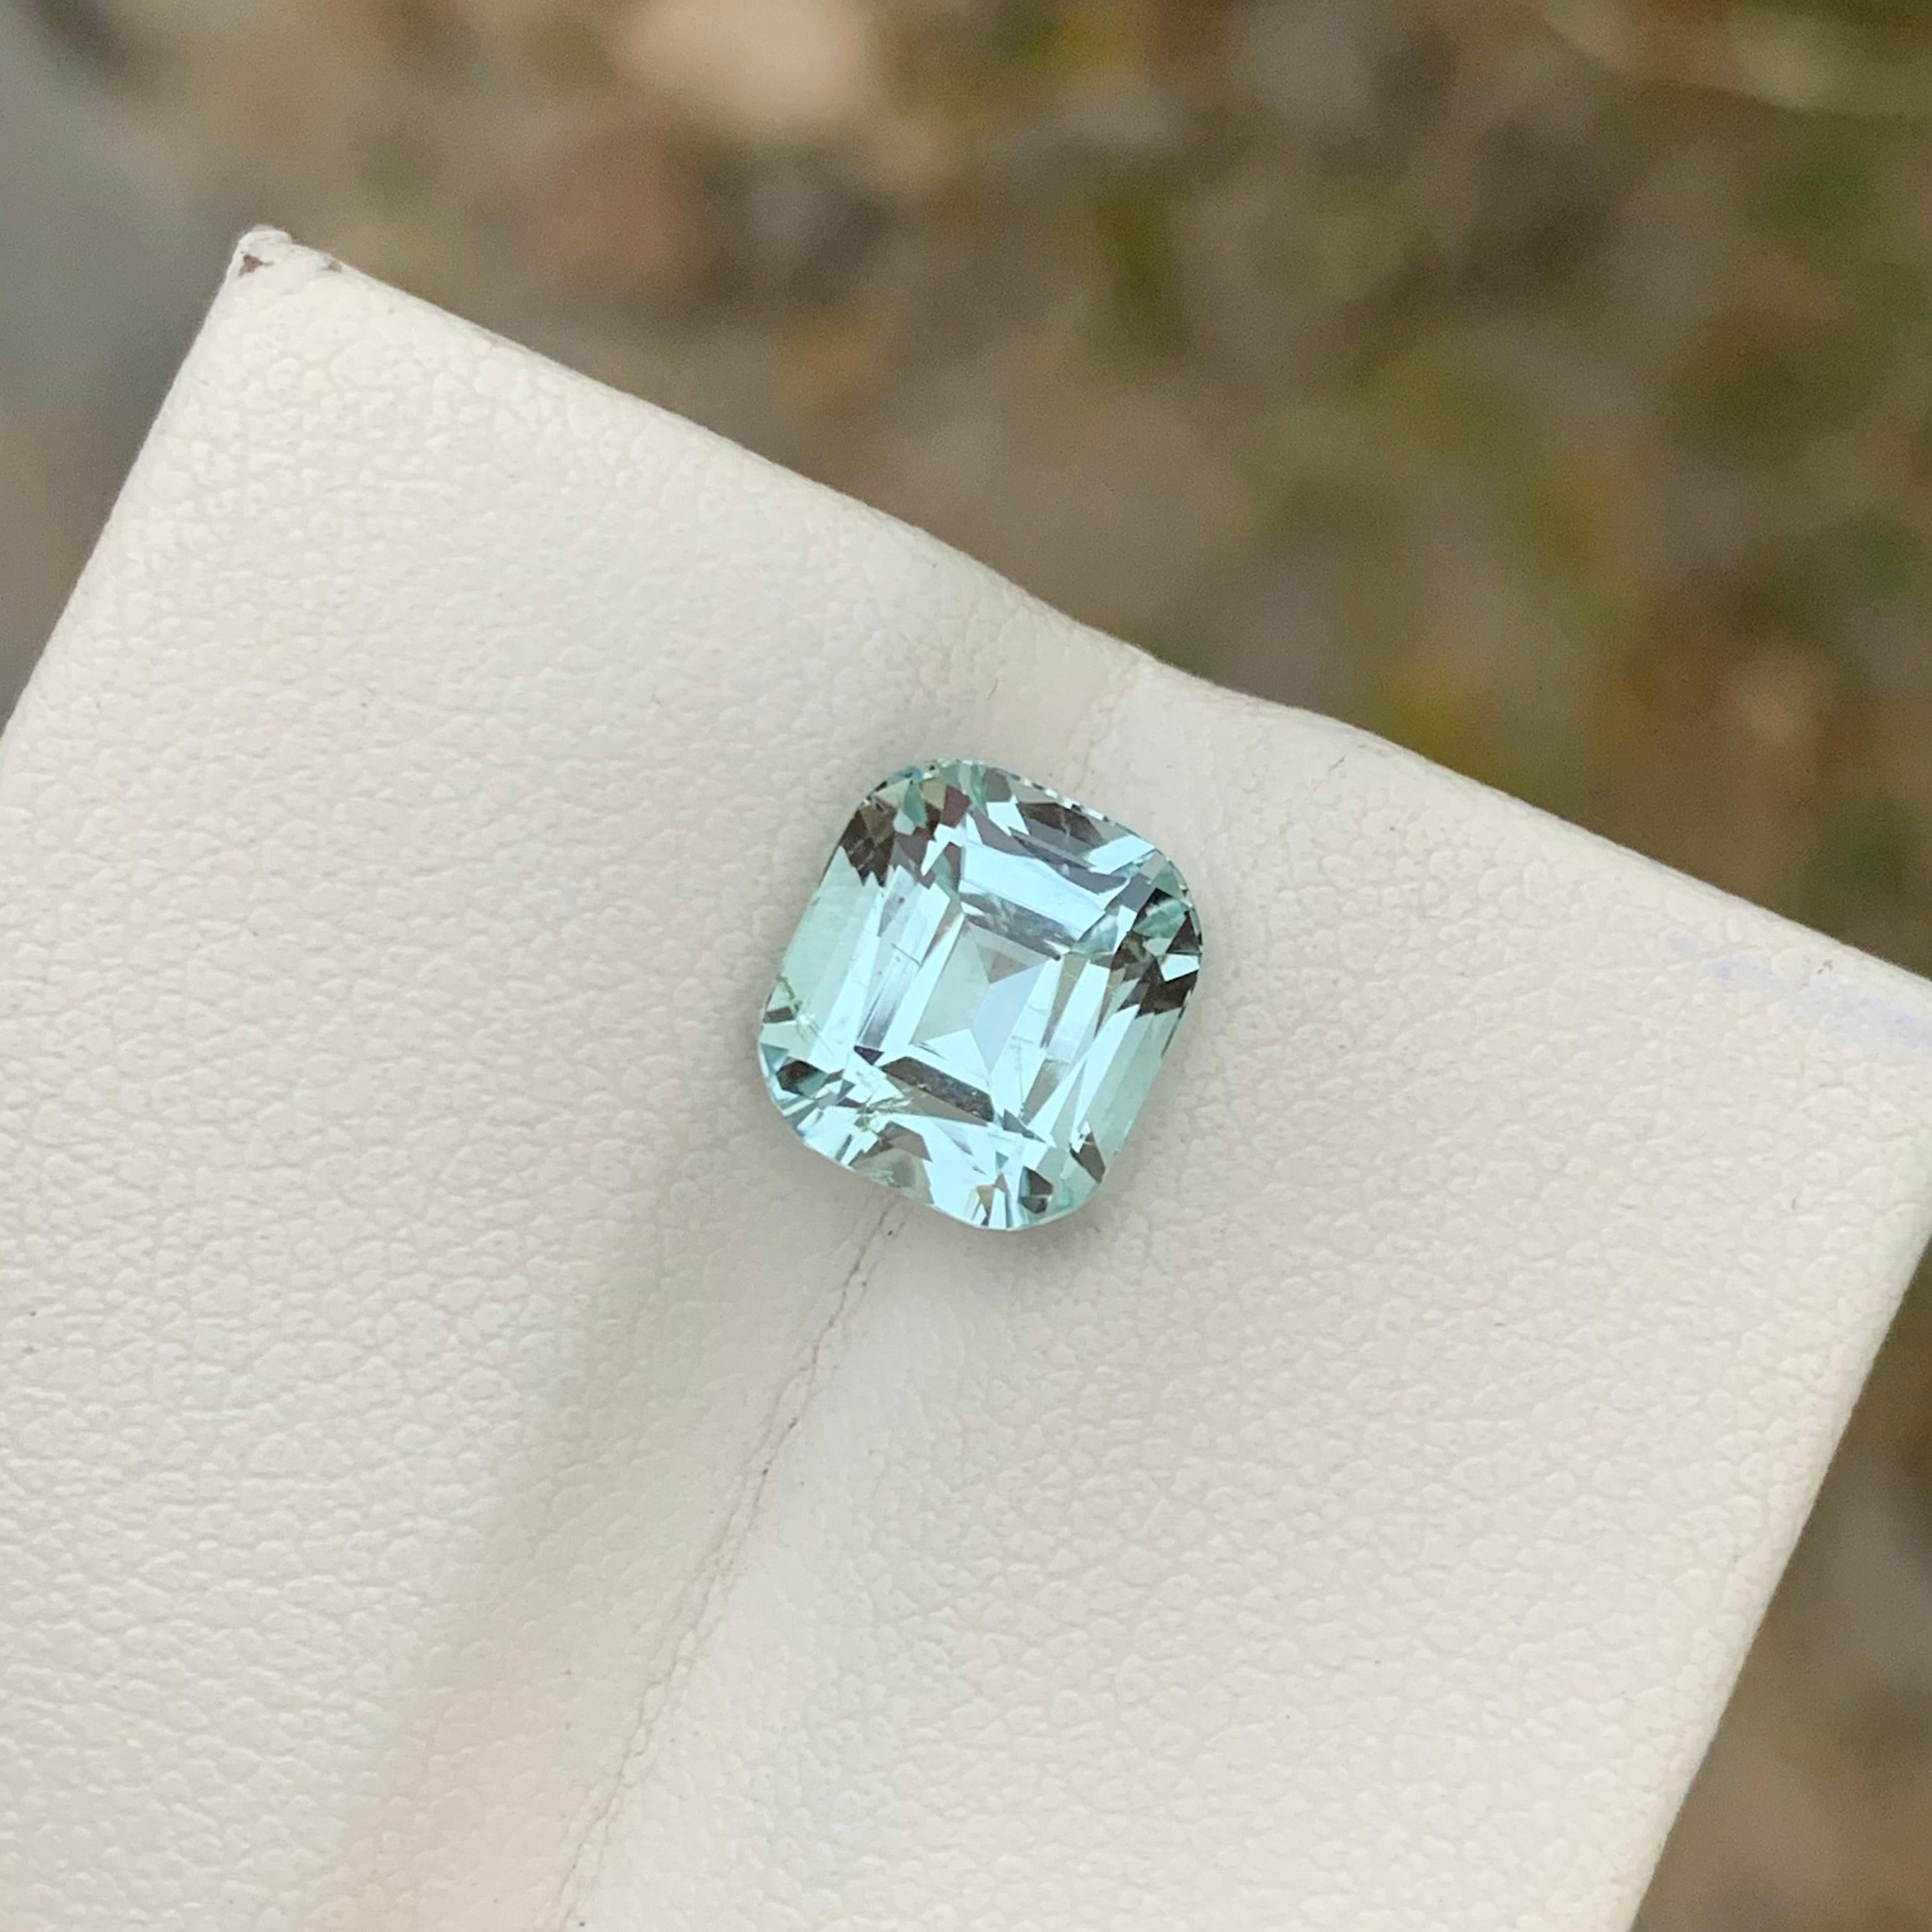 Facet Aquamarine 
Weight: 3.55 Carats 
Dimension: 9x8.1x7 Mm
Origin: Shigar Valley Pakistan 
Shape: Cushion
Color: Light Blue
Treatment: Non
Quality: SI
Aquamarine is a captivating gemstone known for its mesmerizing blue-green hues reminiscent of